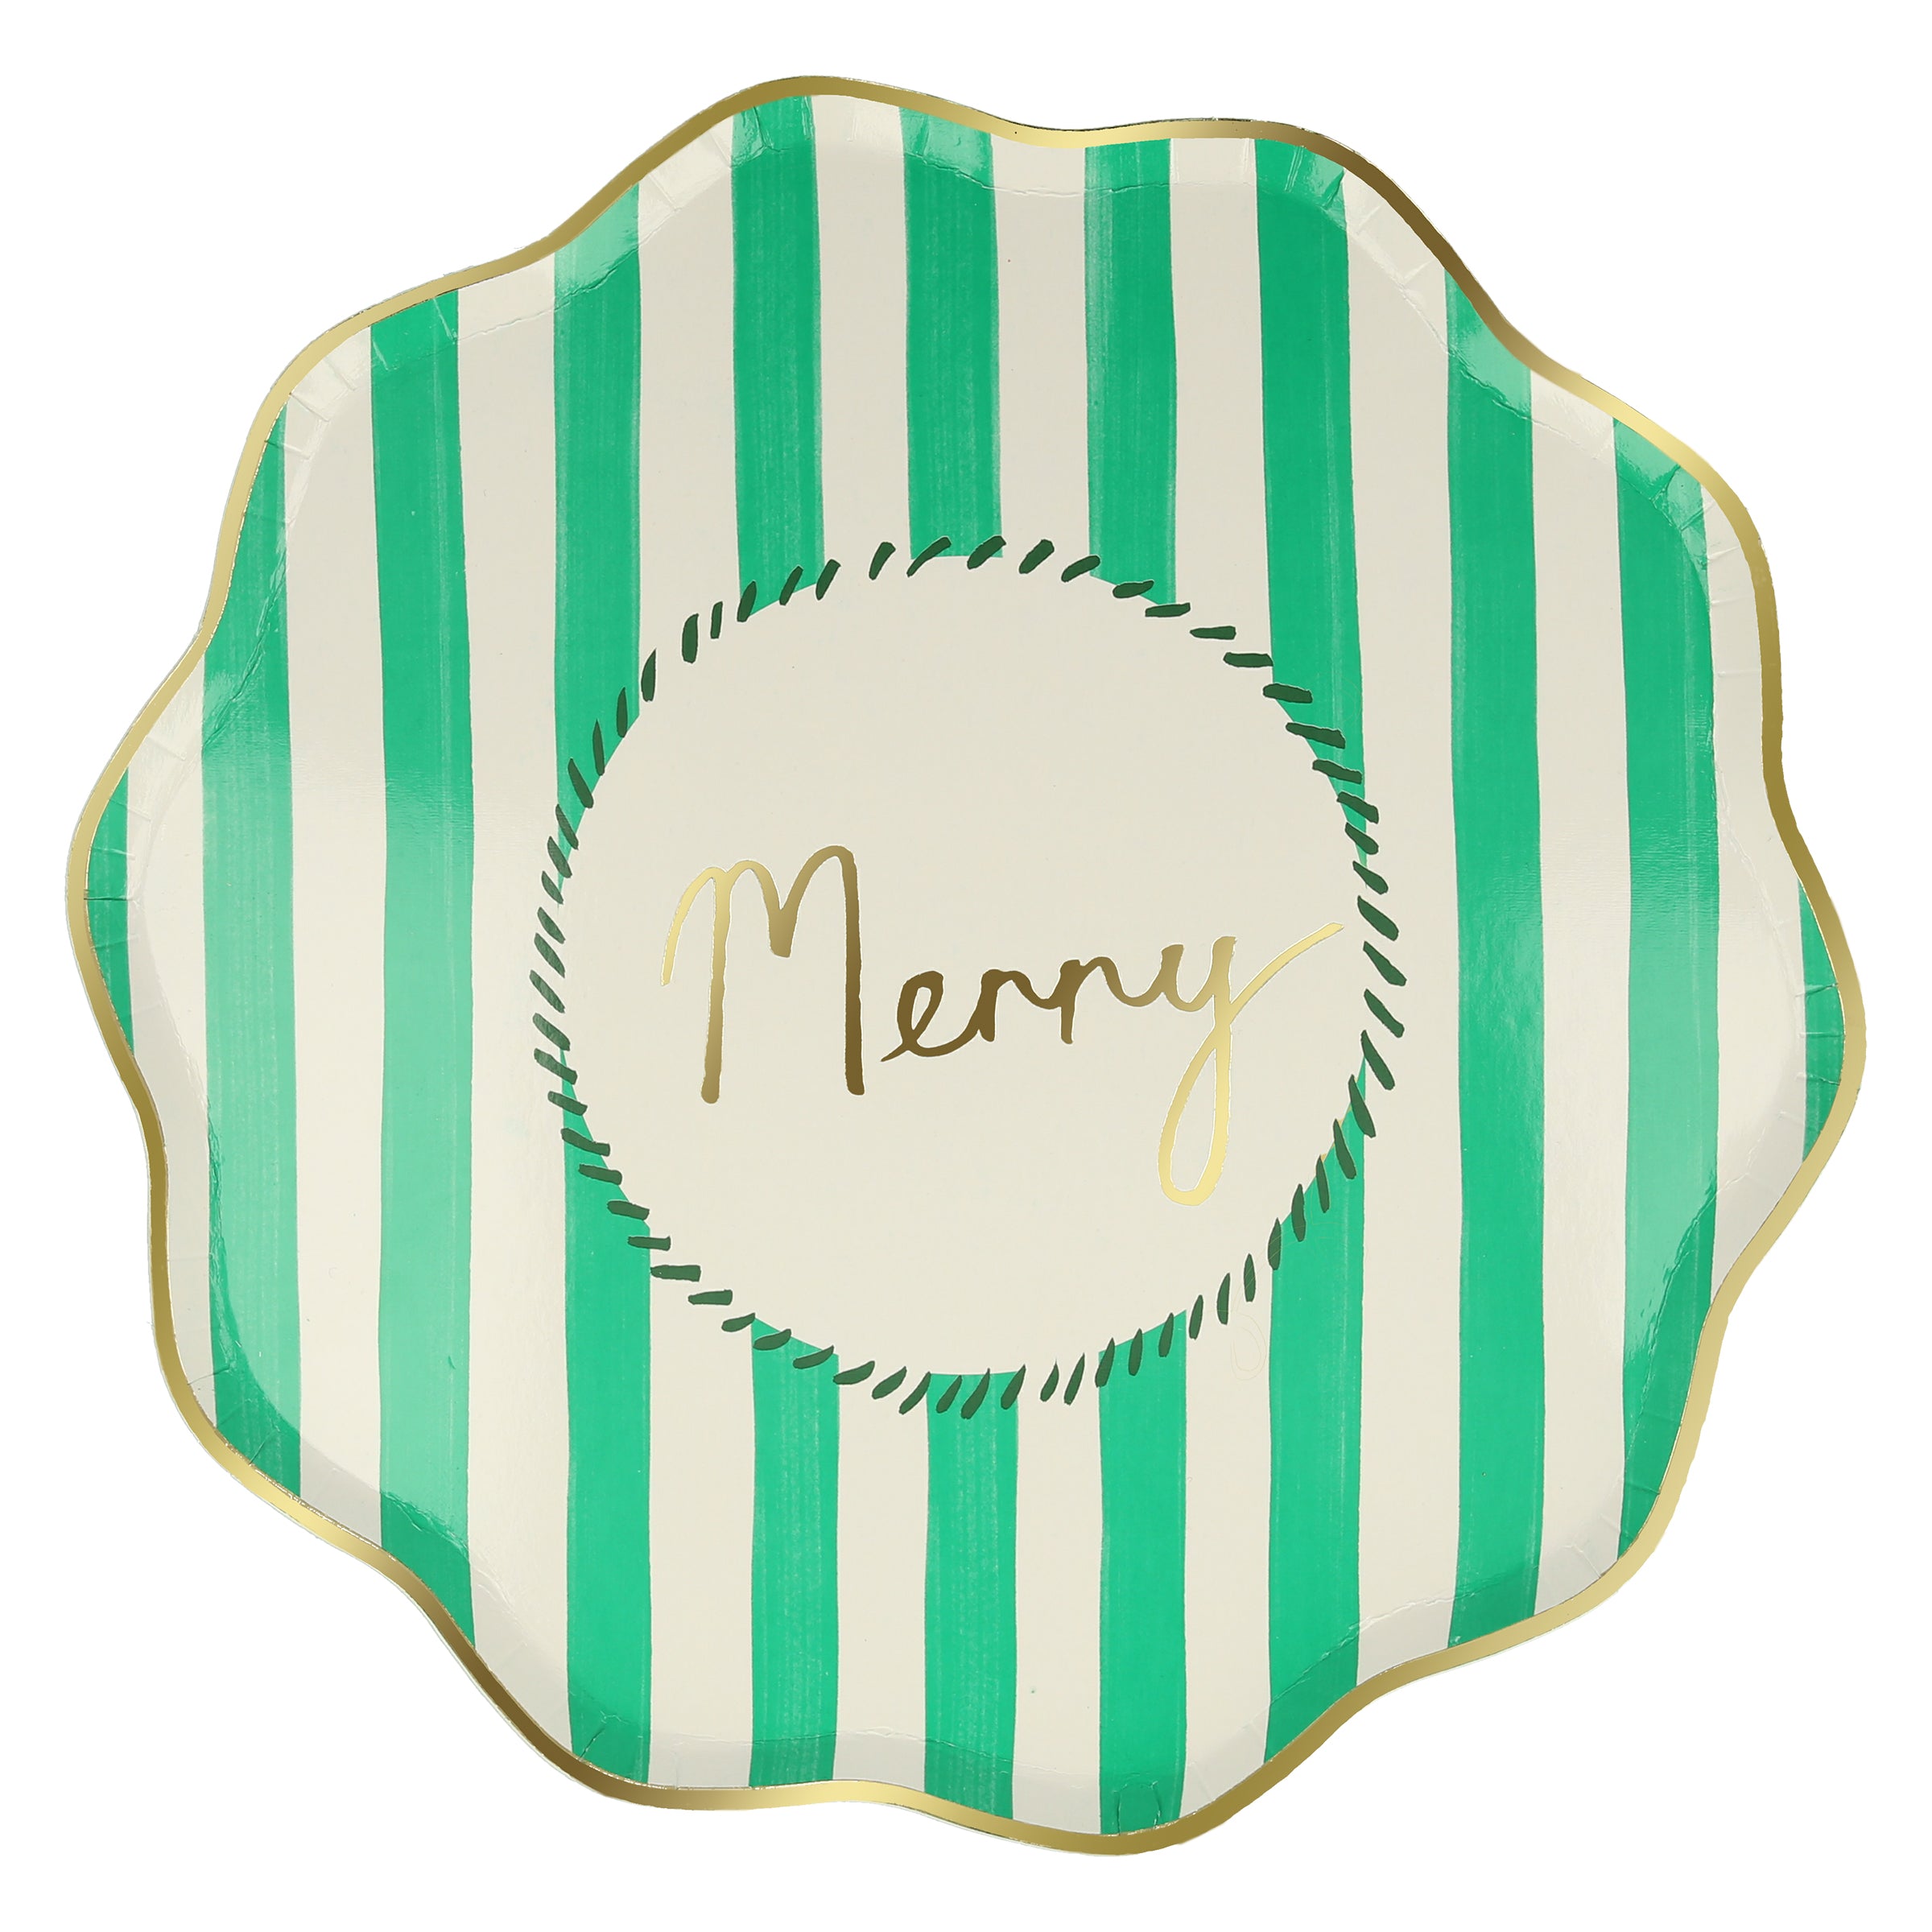 These striped plates are perfect for a stylish Christmas party.